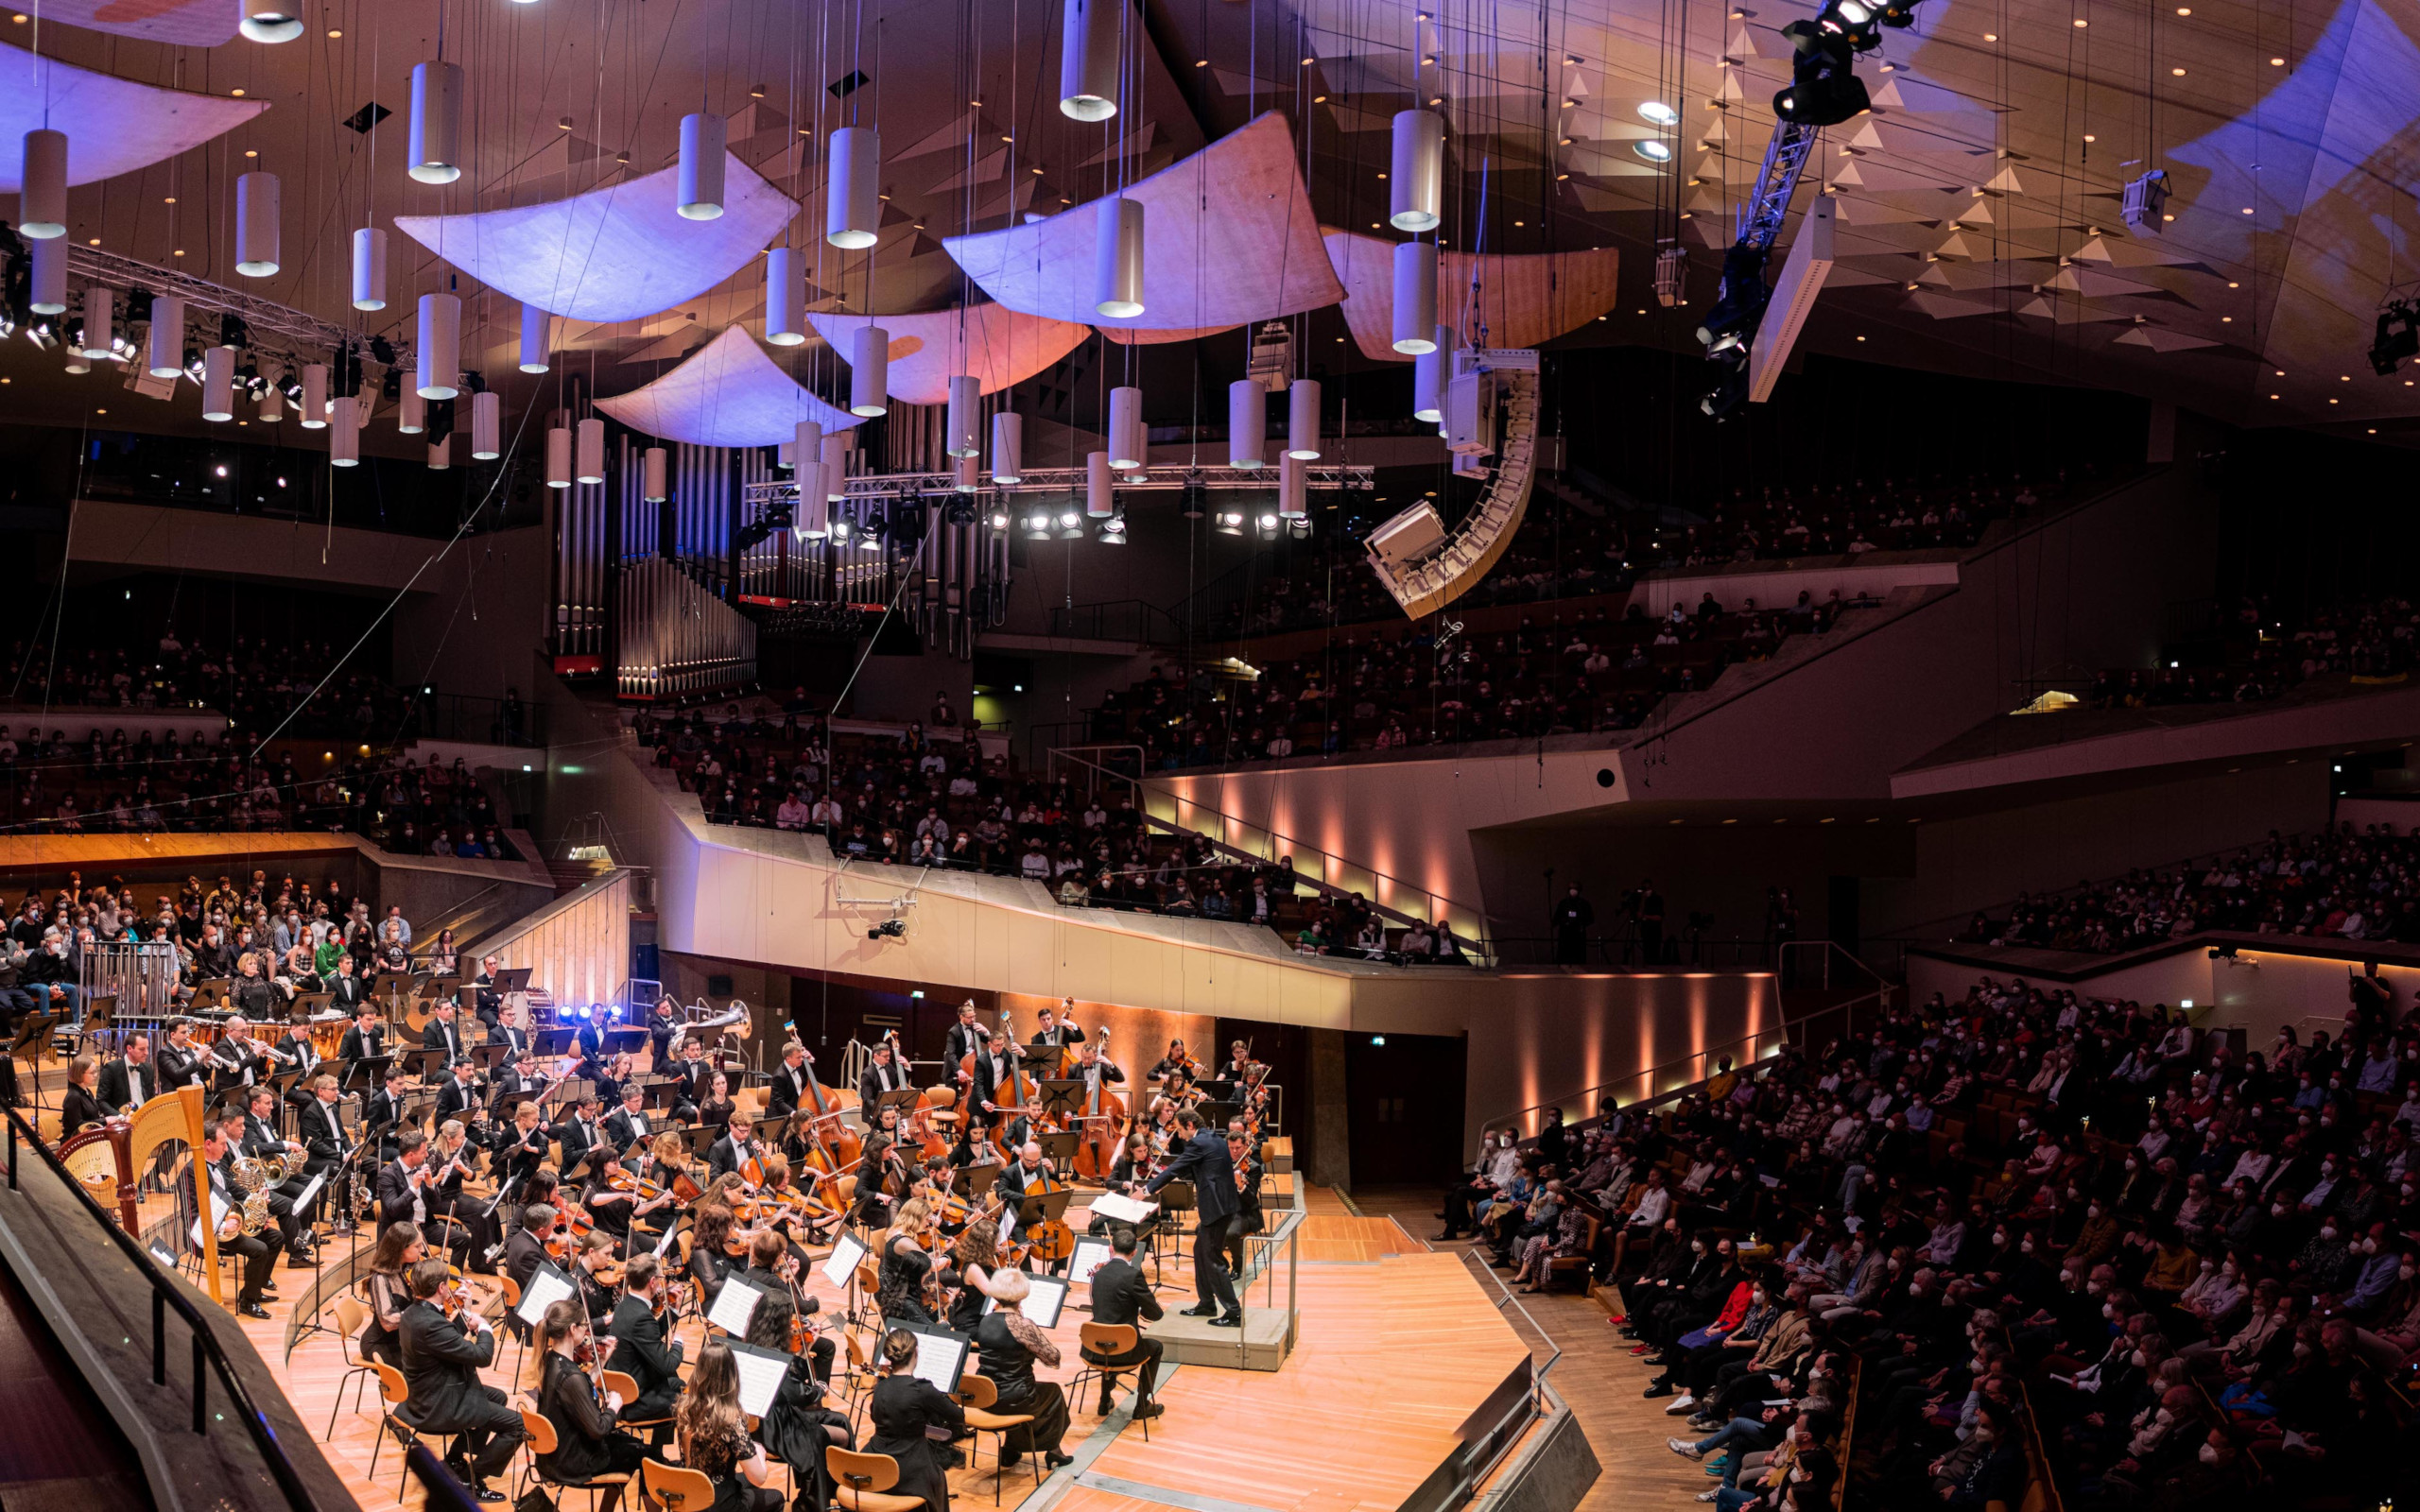 The Kyiv Symphony Orchestra will perform at one of the largest orchestral festivals in Austria